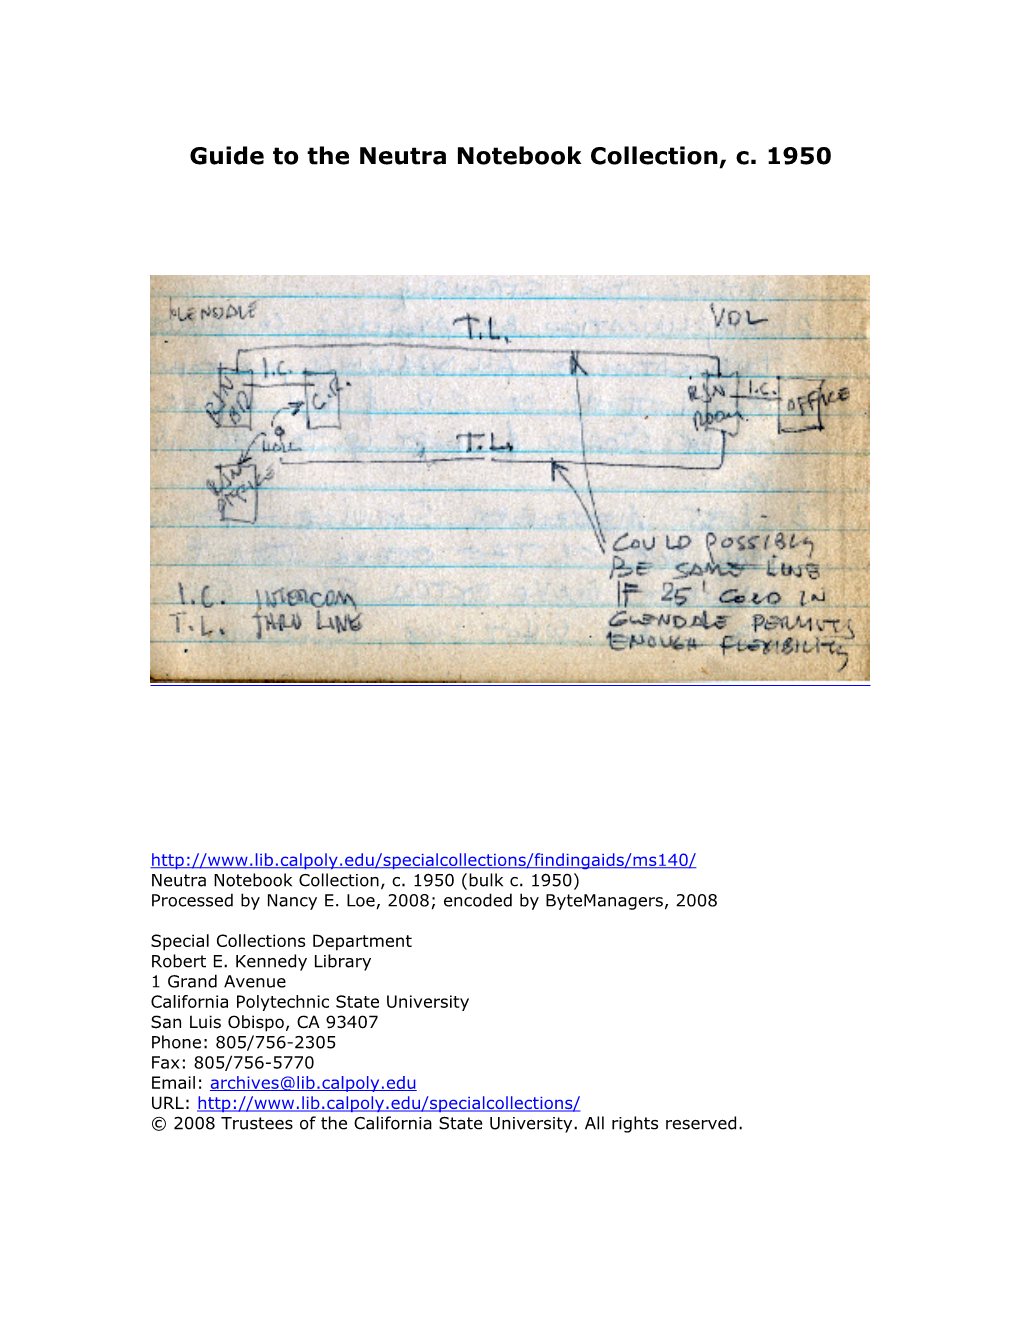 Guide to the Neutra Notebook Collection, C. 1950